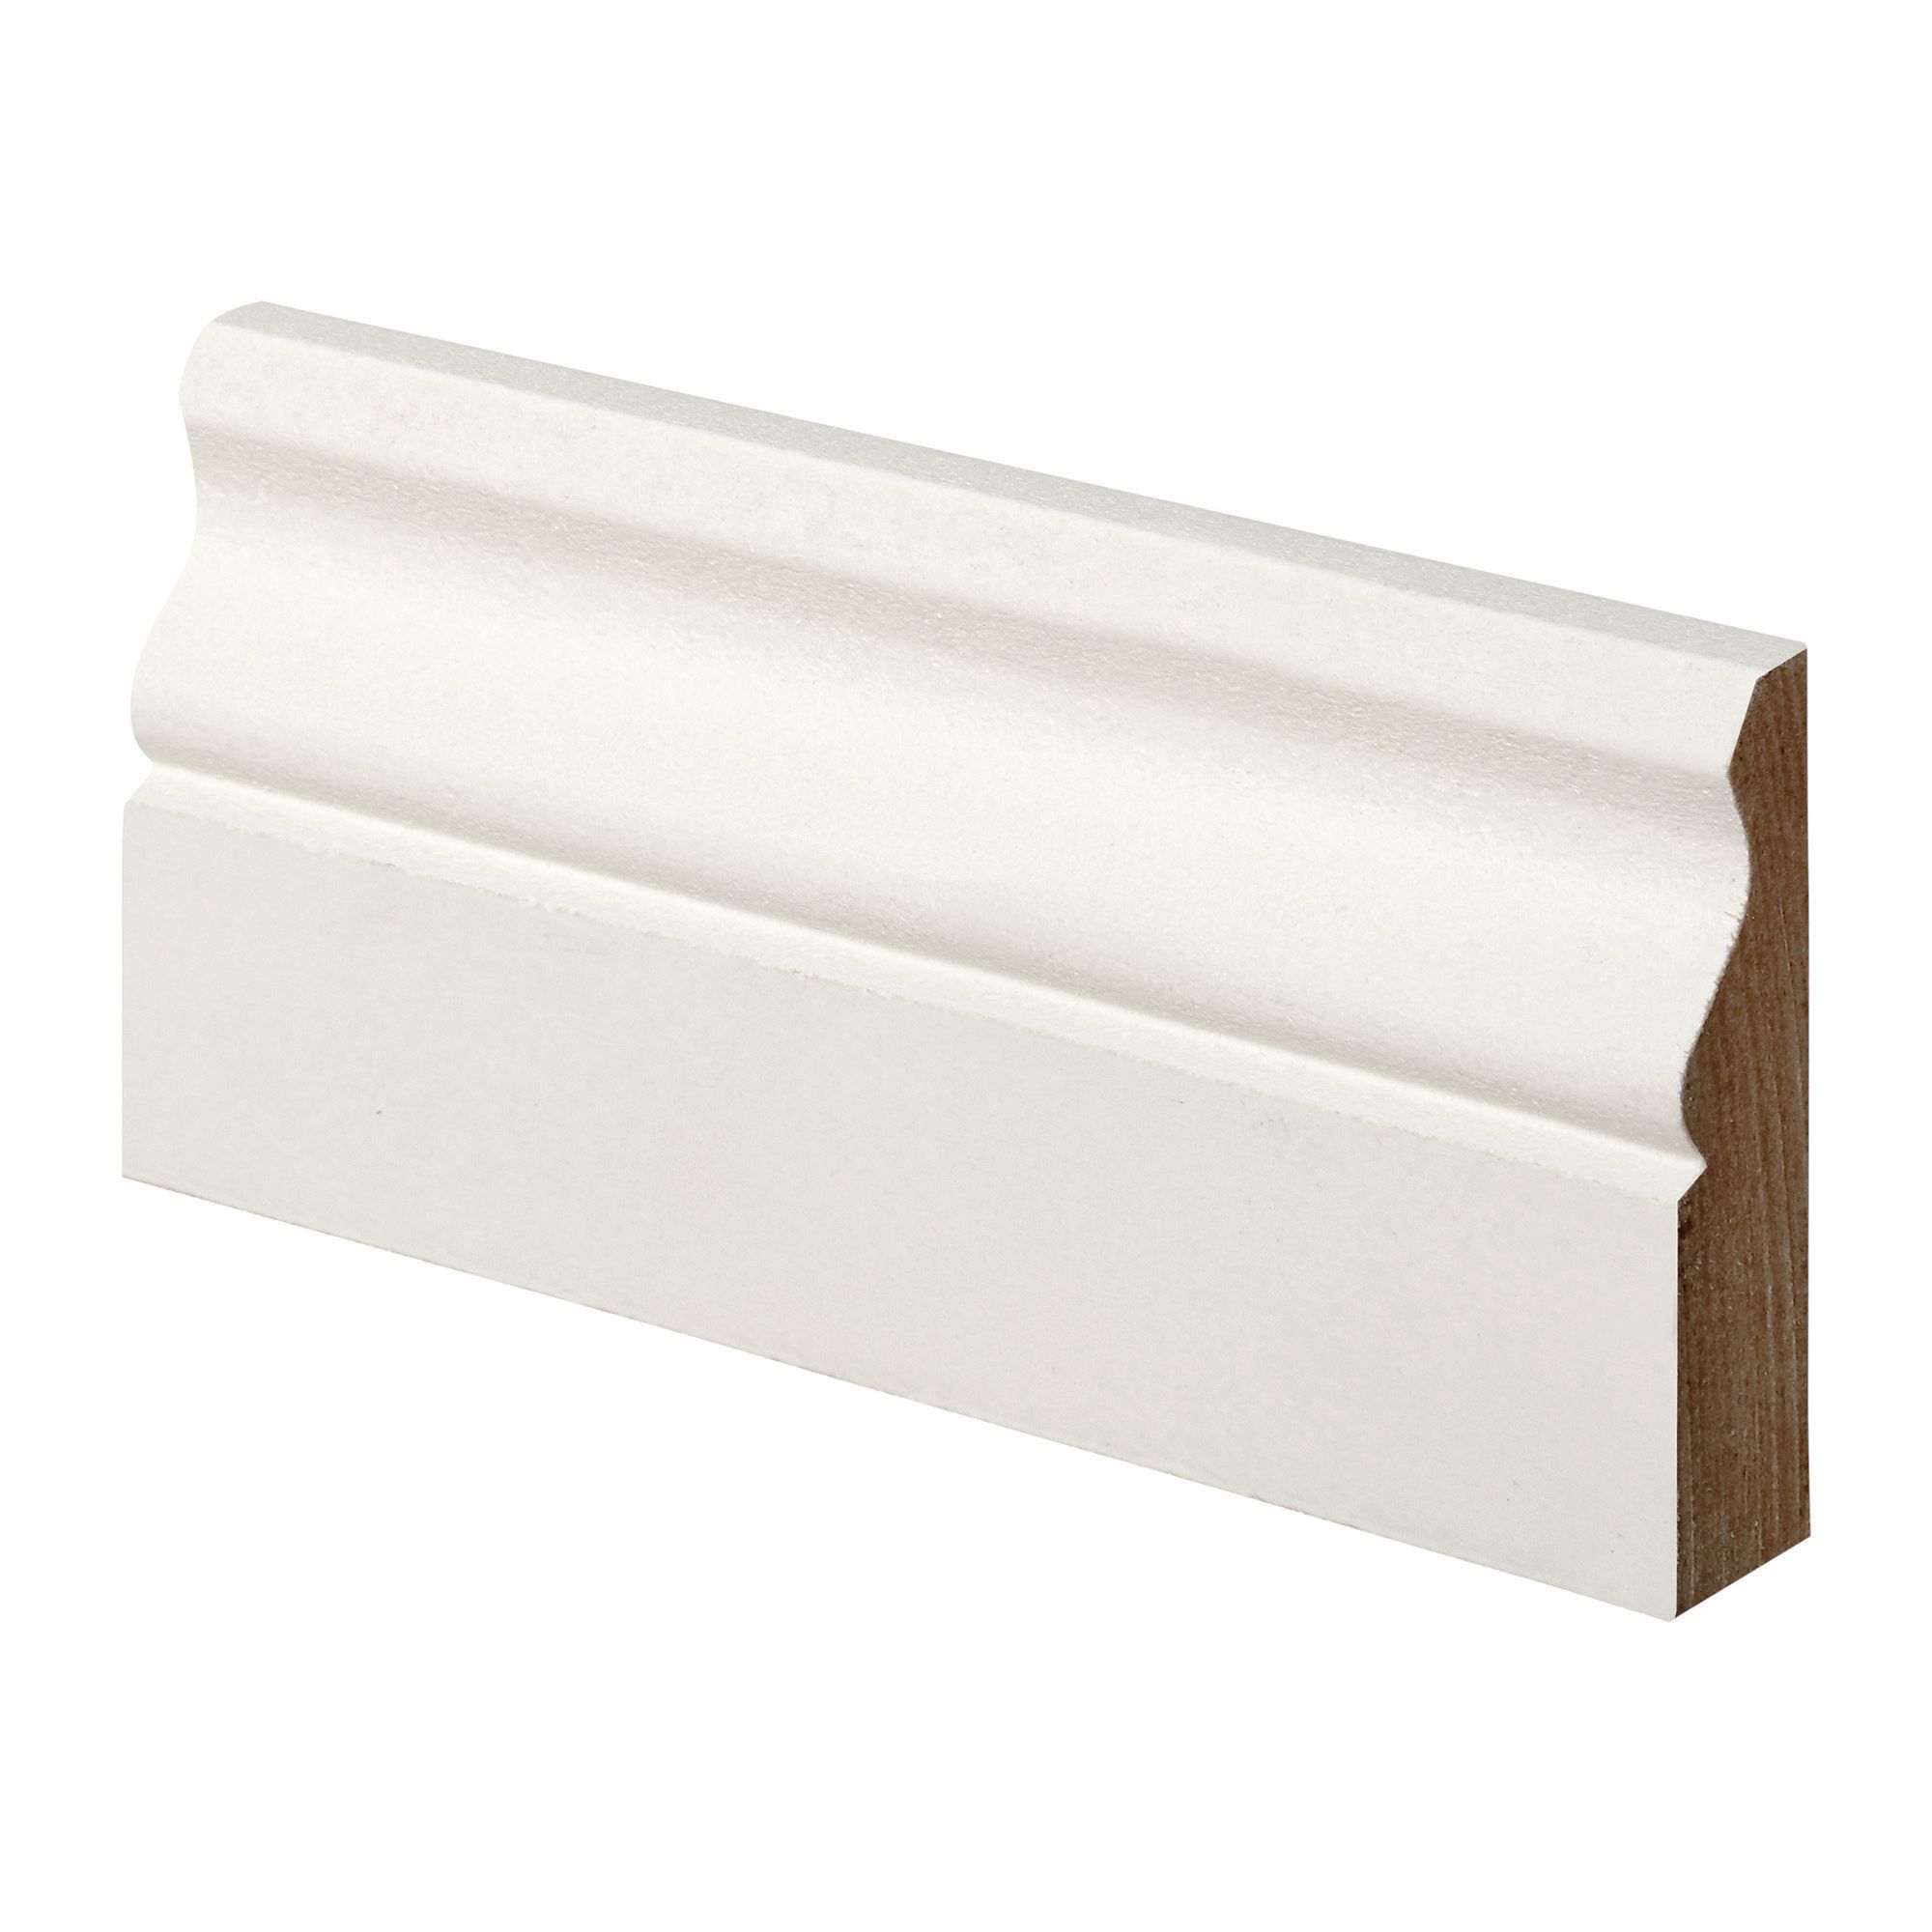 Image of Wickes Ogee Primed MDF Architrave - 18mm x 69mm x 2.1m